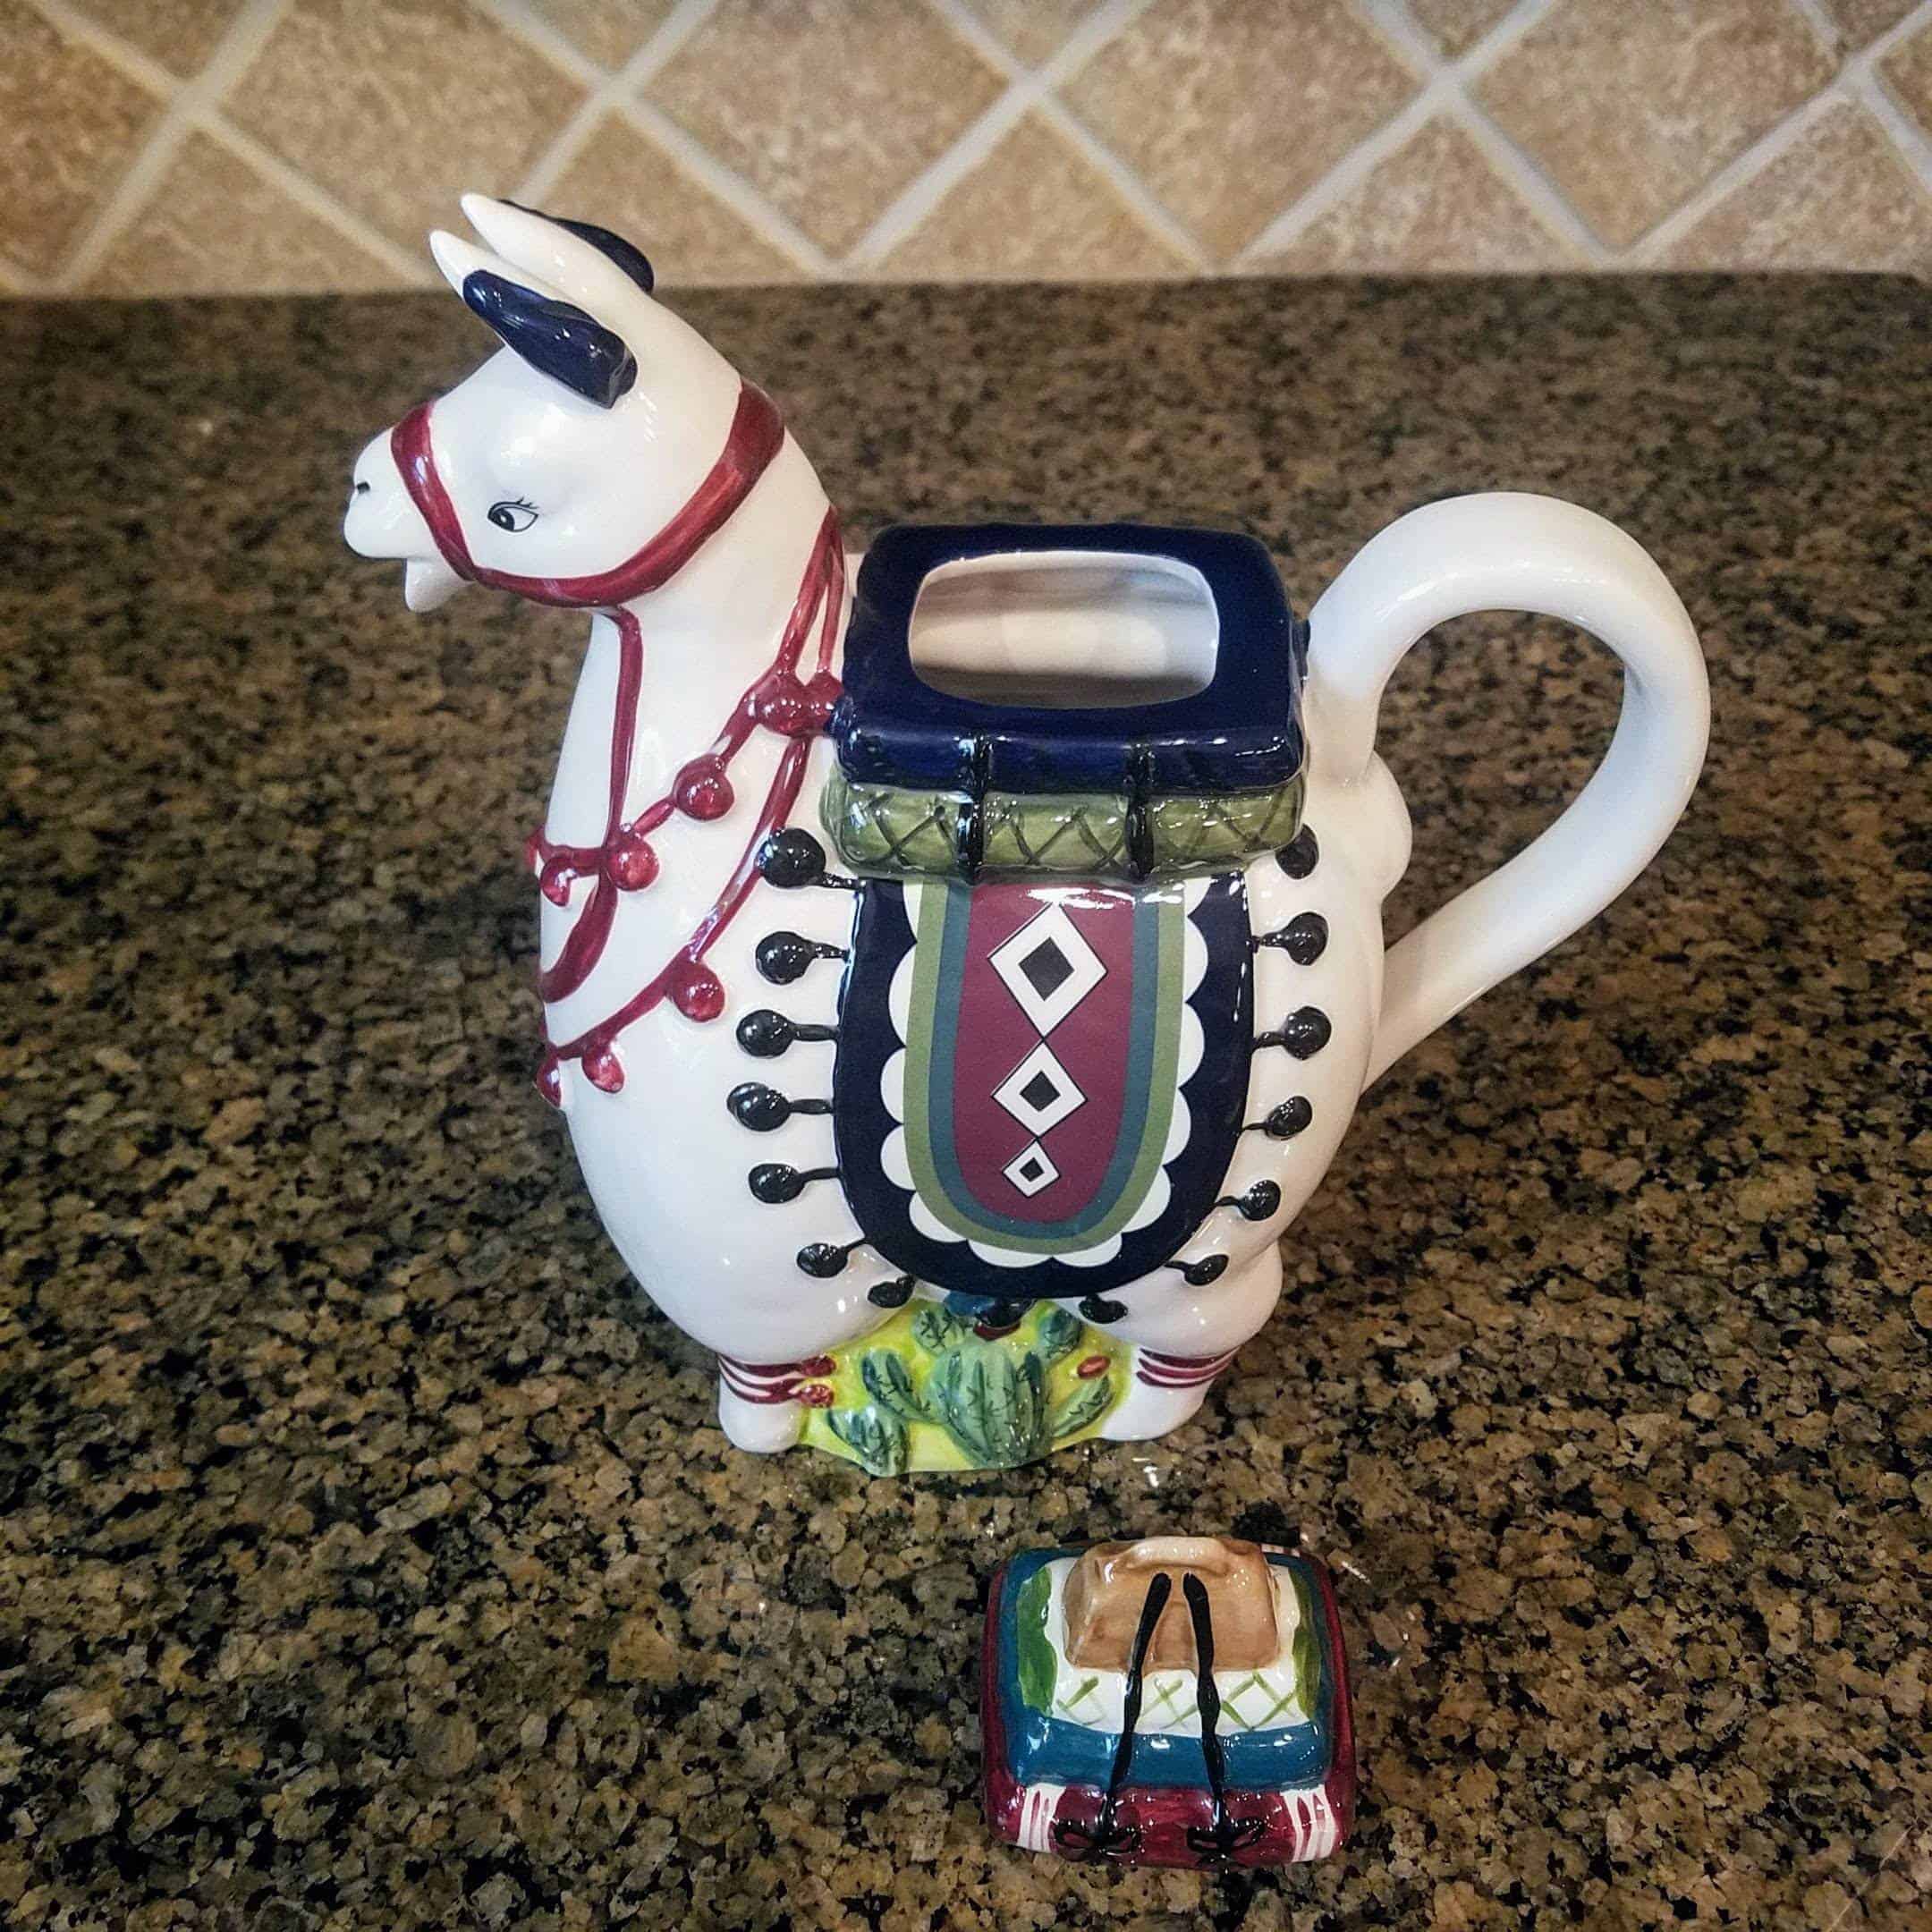 This Llama Teapot is made with love by Premier Homegoods! Shop more unique gift ideas today with Spots Initiatives, the best way to support creators.